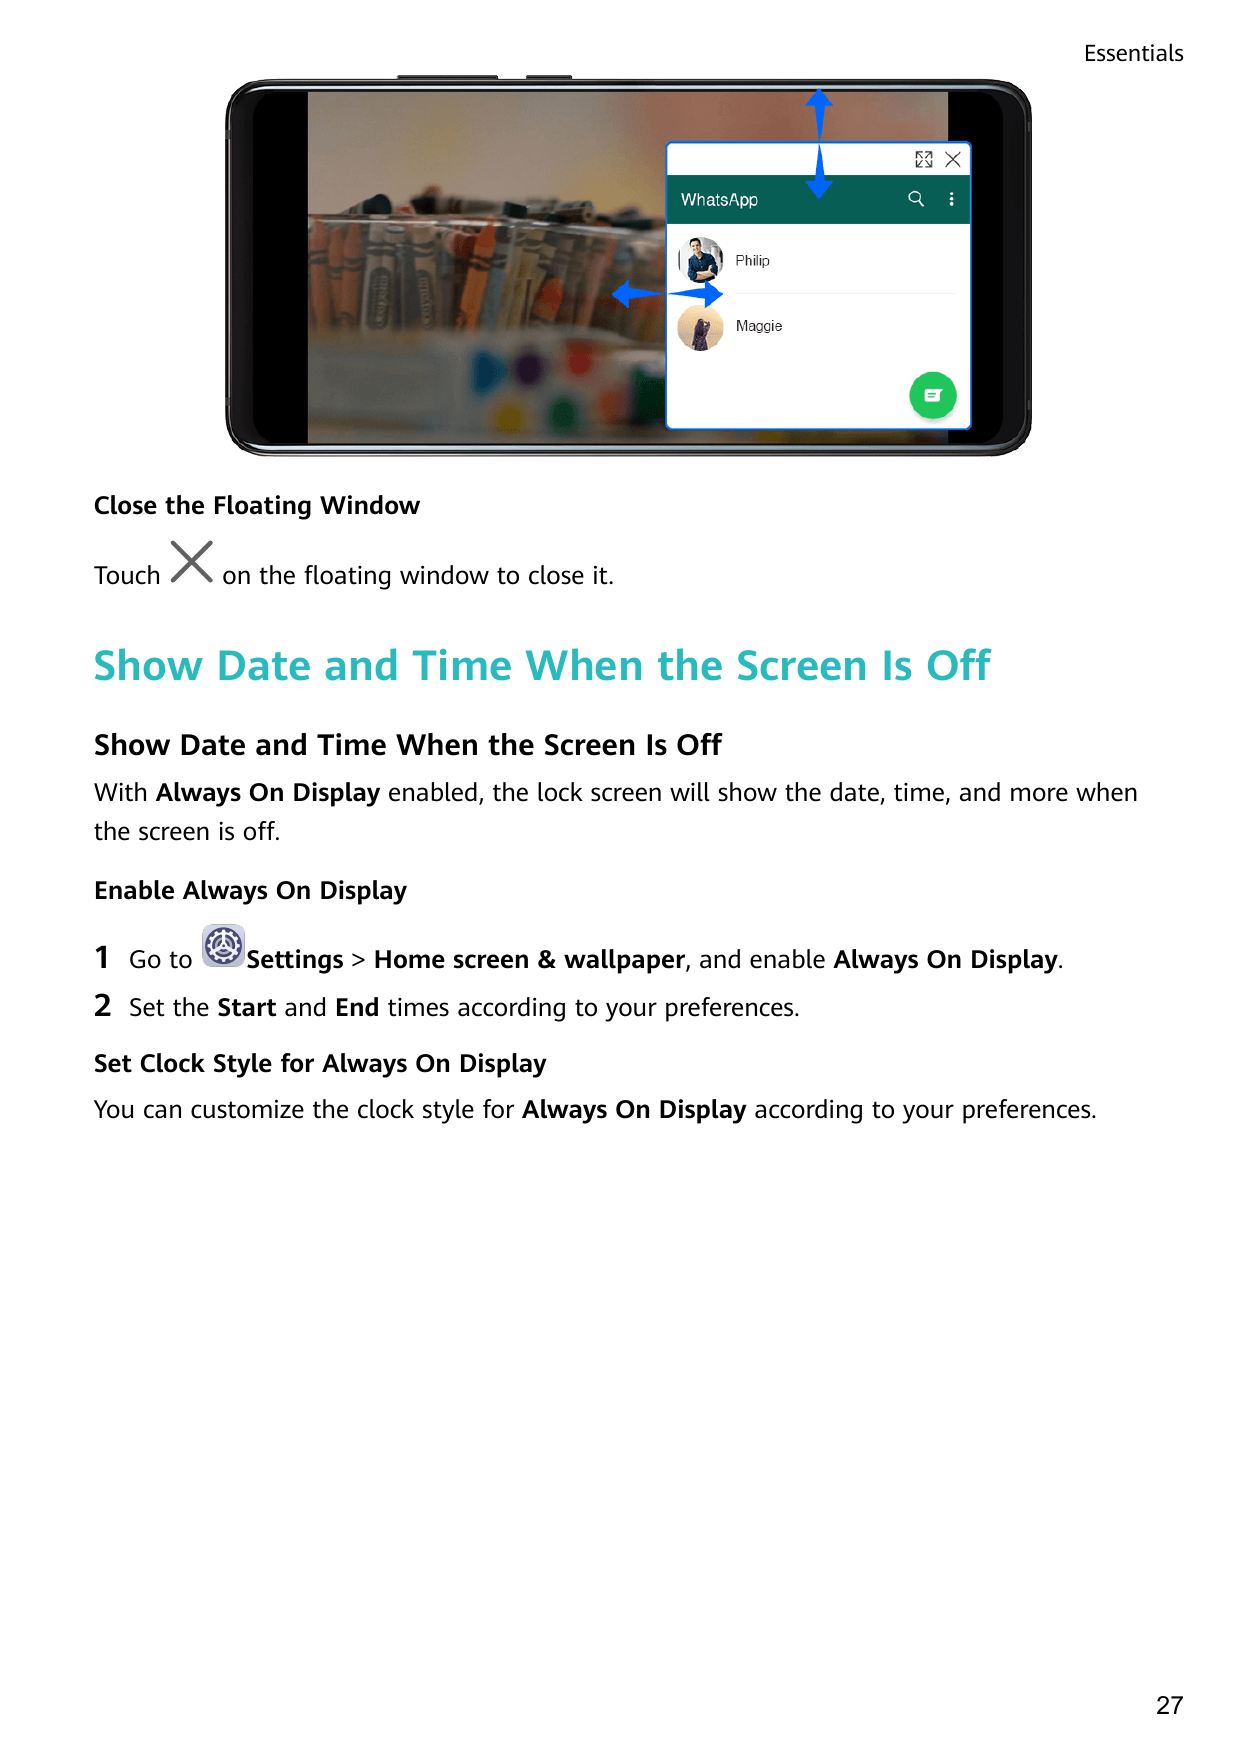 EssentialsClose the Floating WindowTouchon the floating window to close it.Show Date and Time When the Screen Is OffShow Date an